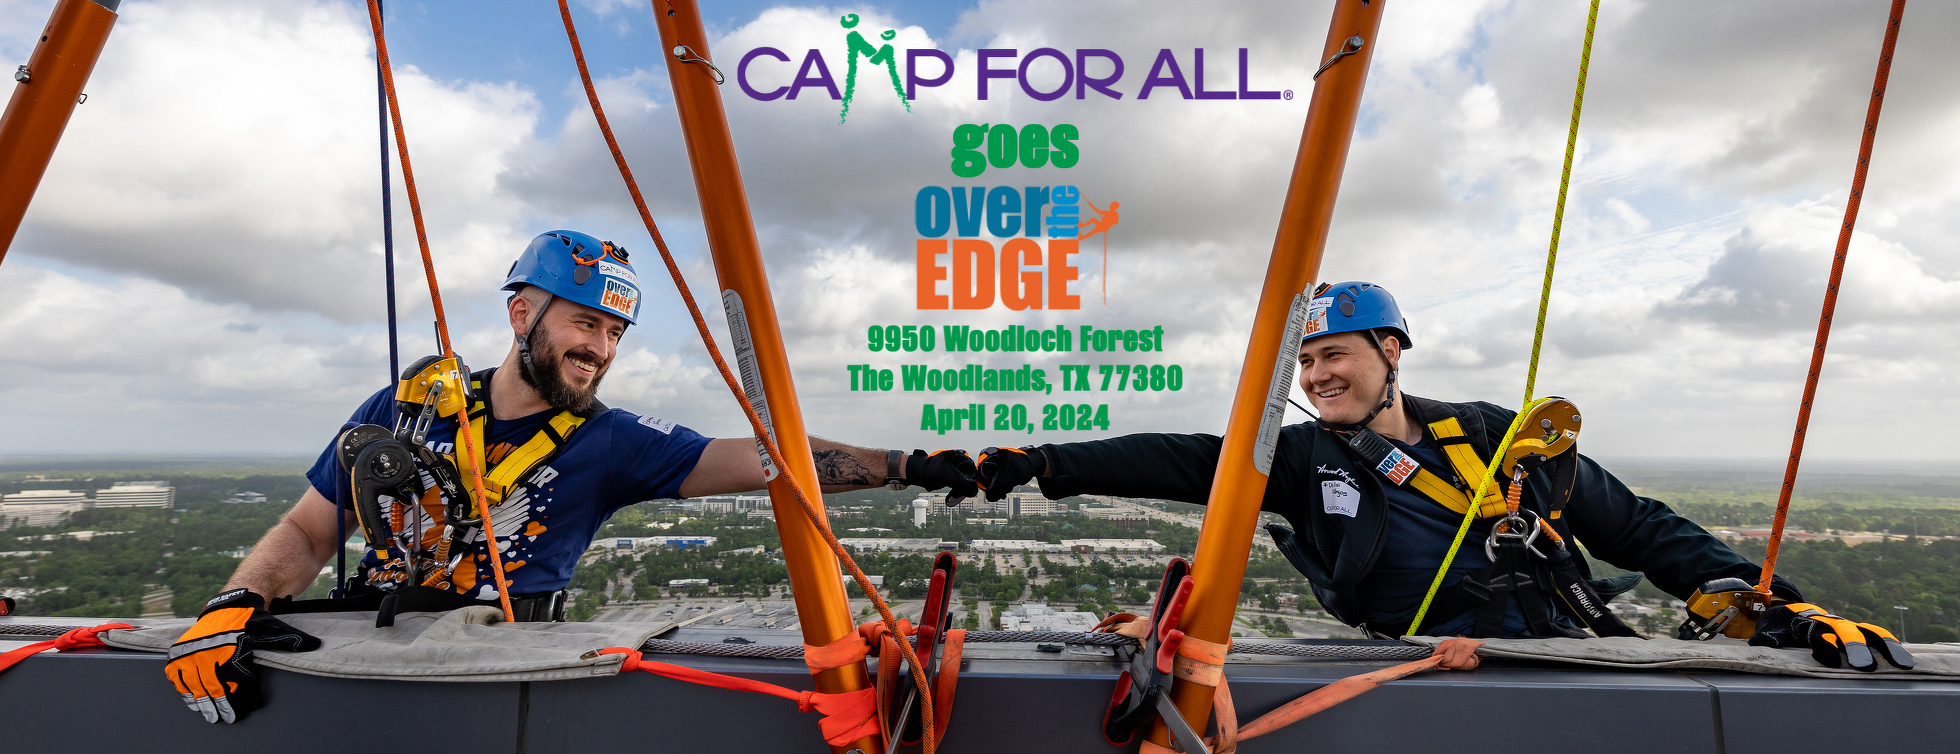 Camp For All goes Over The Edge